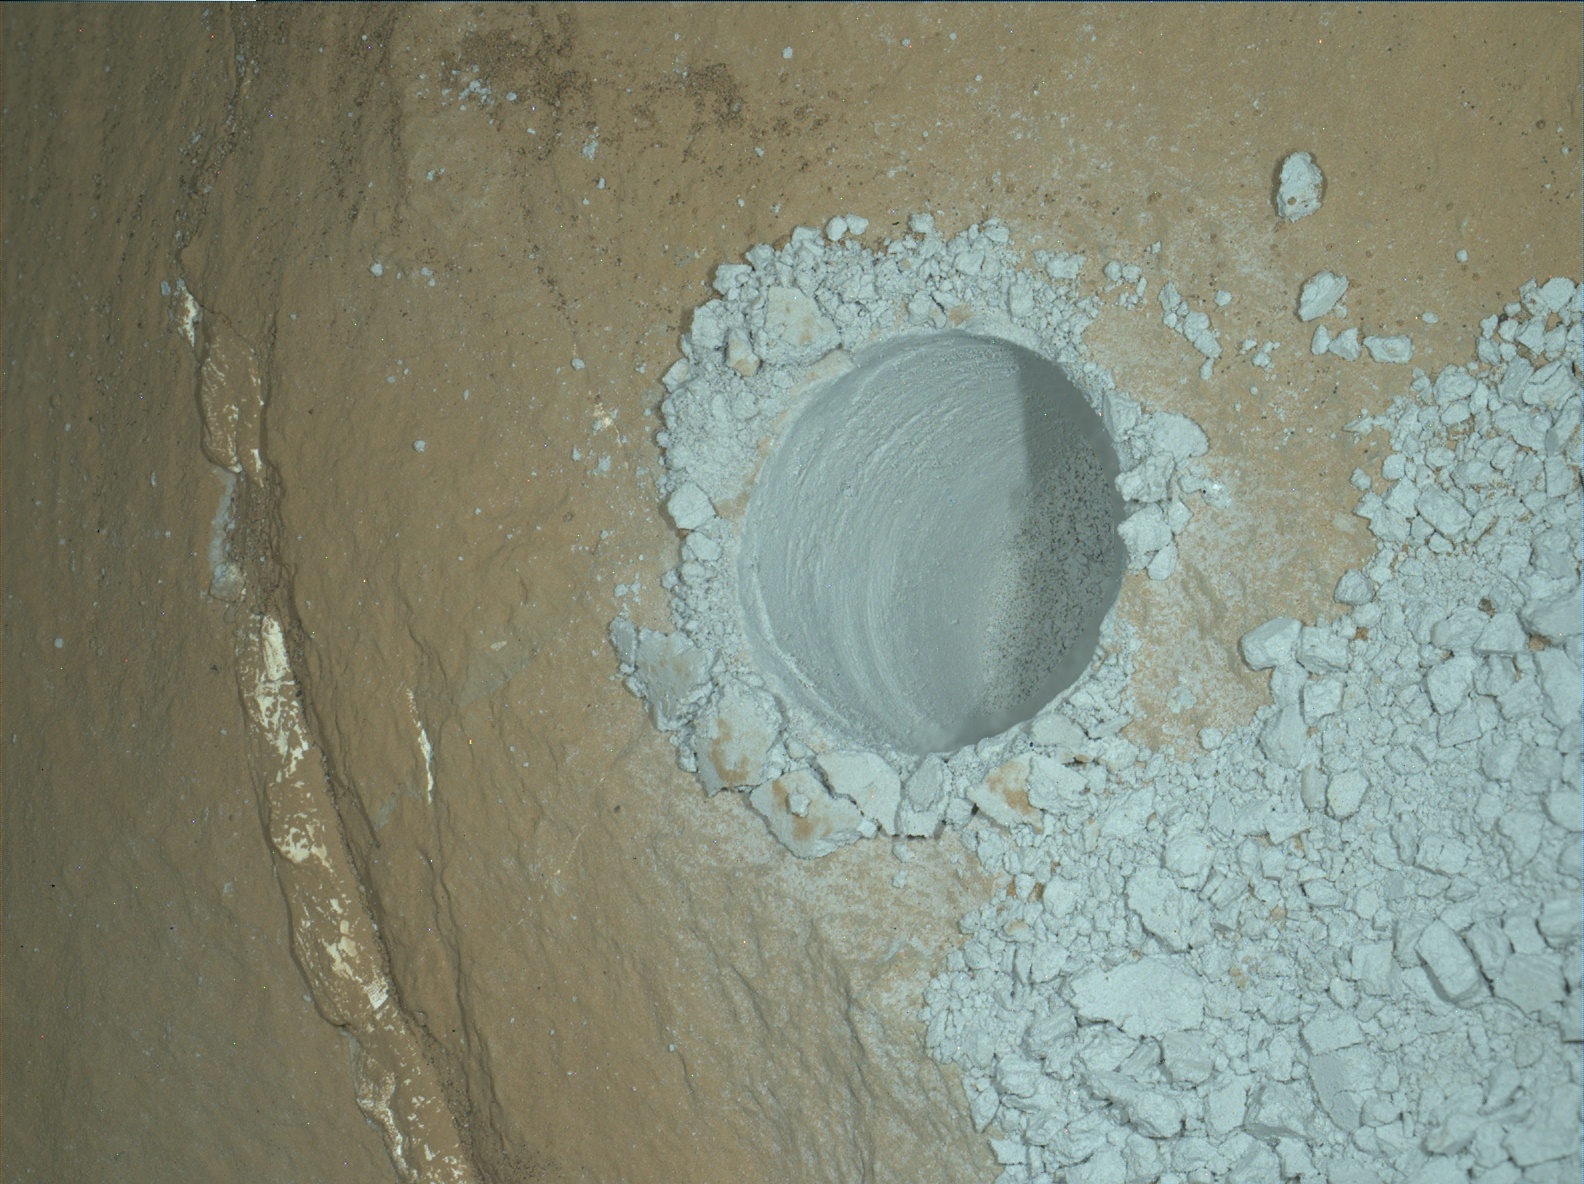 Nasa's Mars rover Curiosity acquired this image using its Mars Hand Lens Imager (MAHLI) on Sol 1129